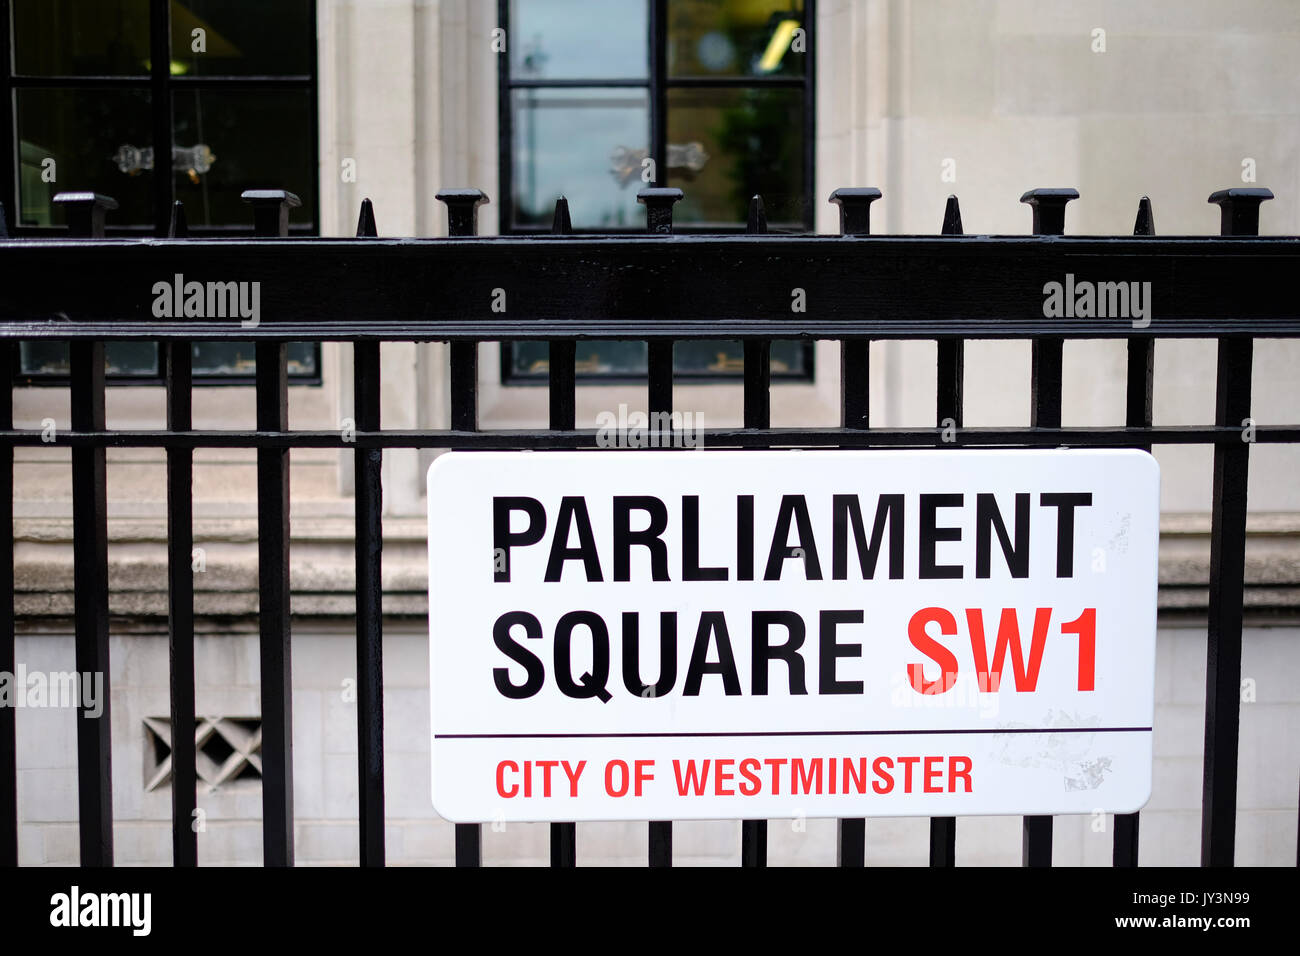 Street sign for Parliament Square in London, SW1 Stock Photo